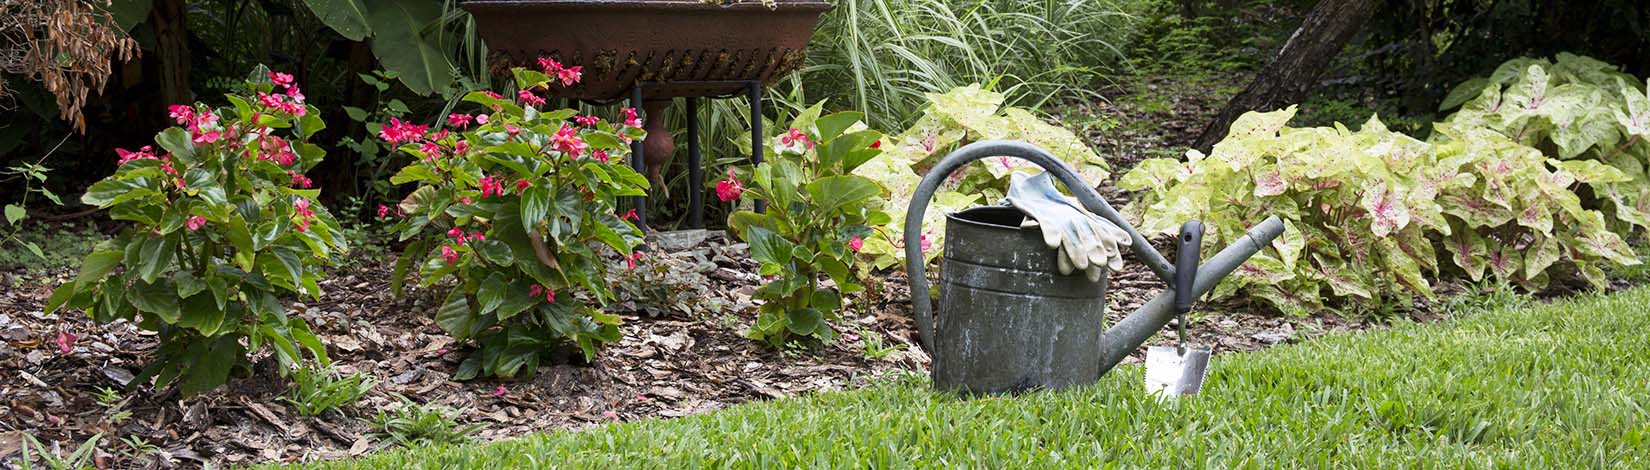 Watering container in a garden